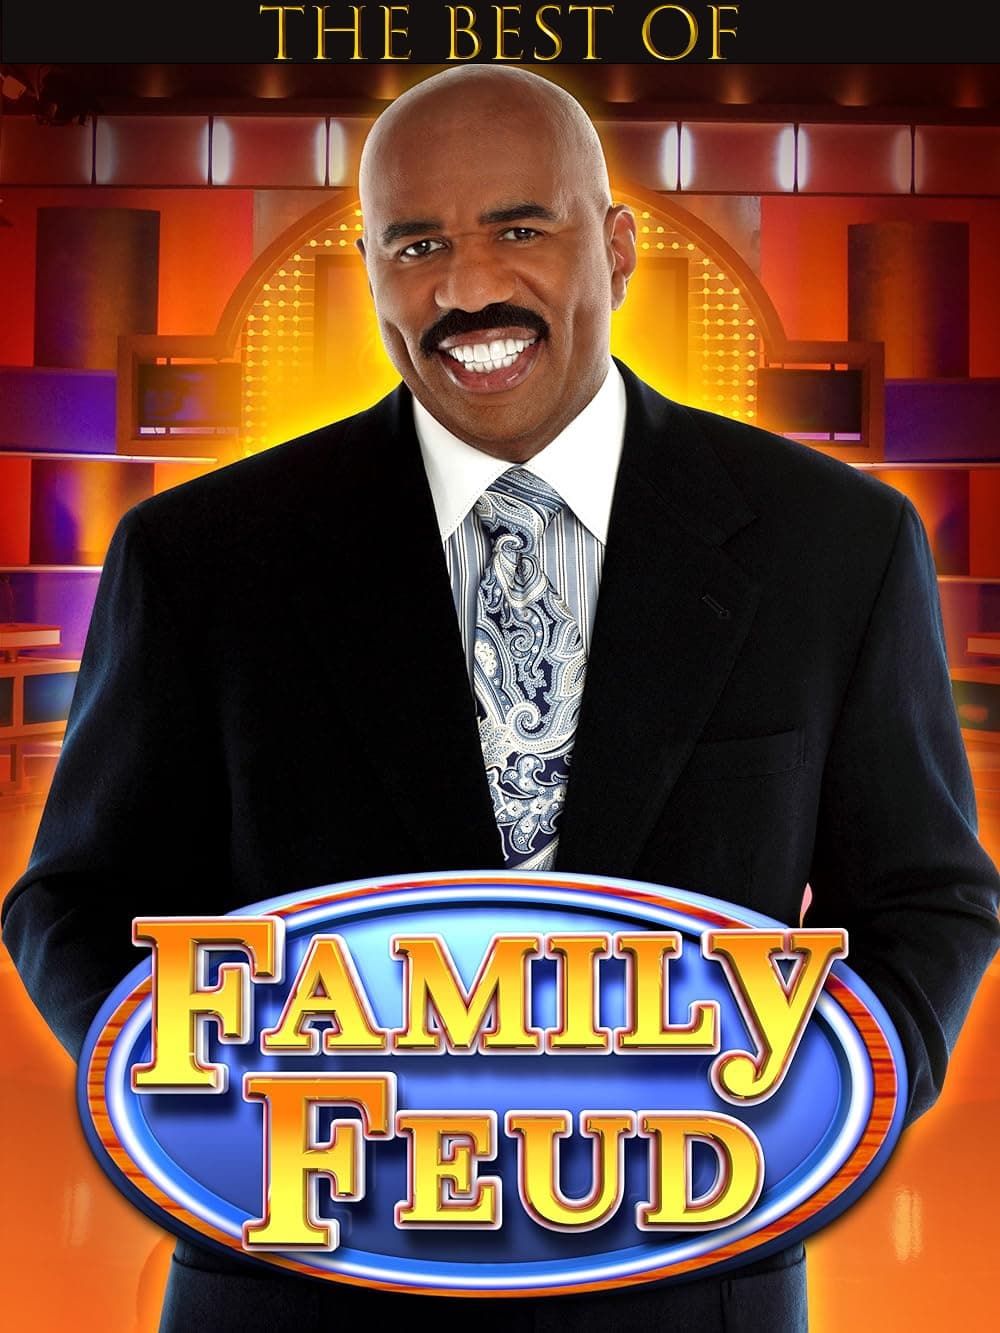 The Best of Family Feud